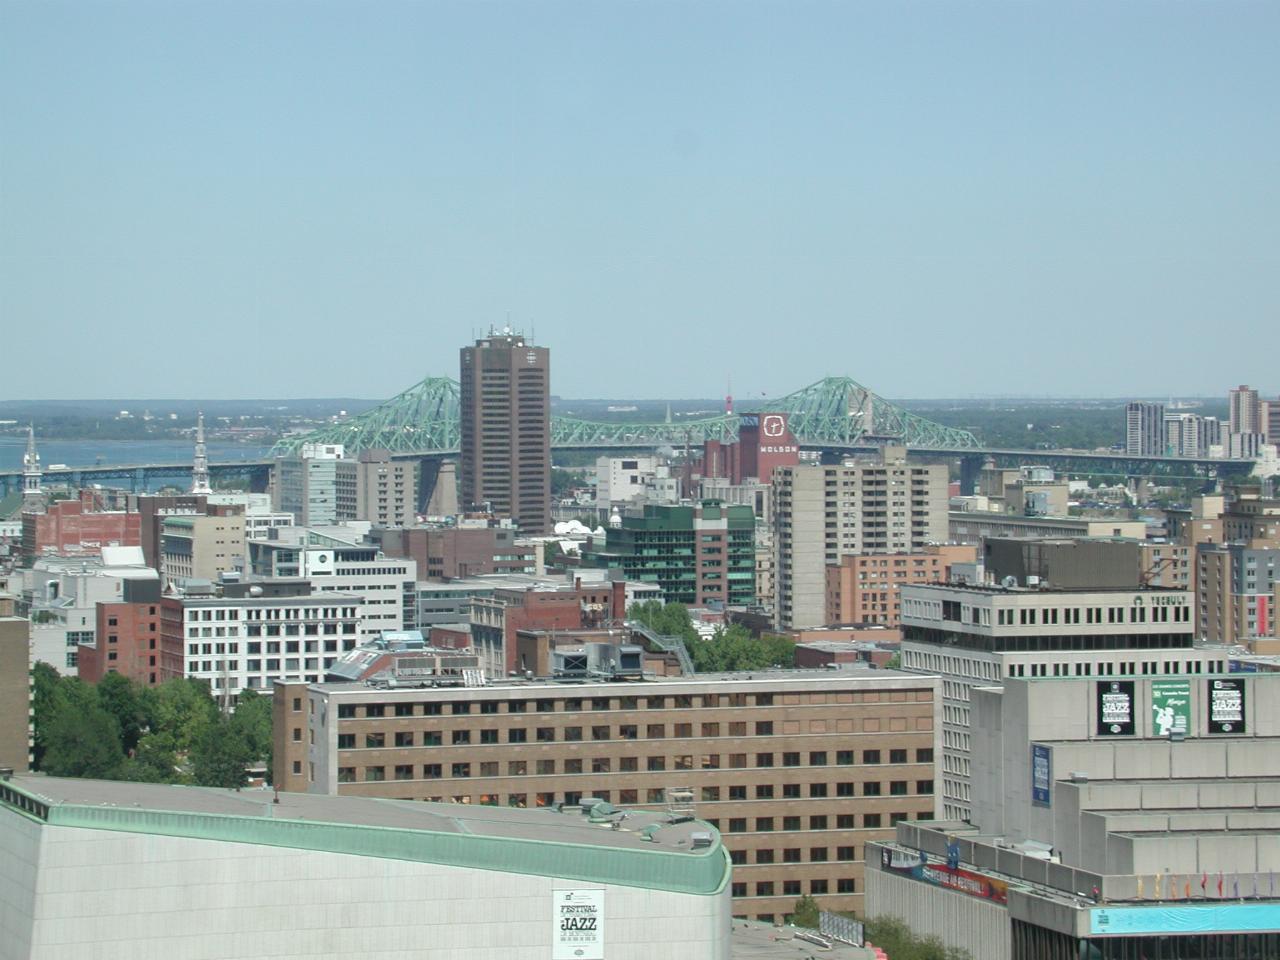 View of (I think) first car bridge across the St. Lawrence River in Montreal